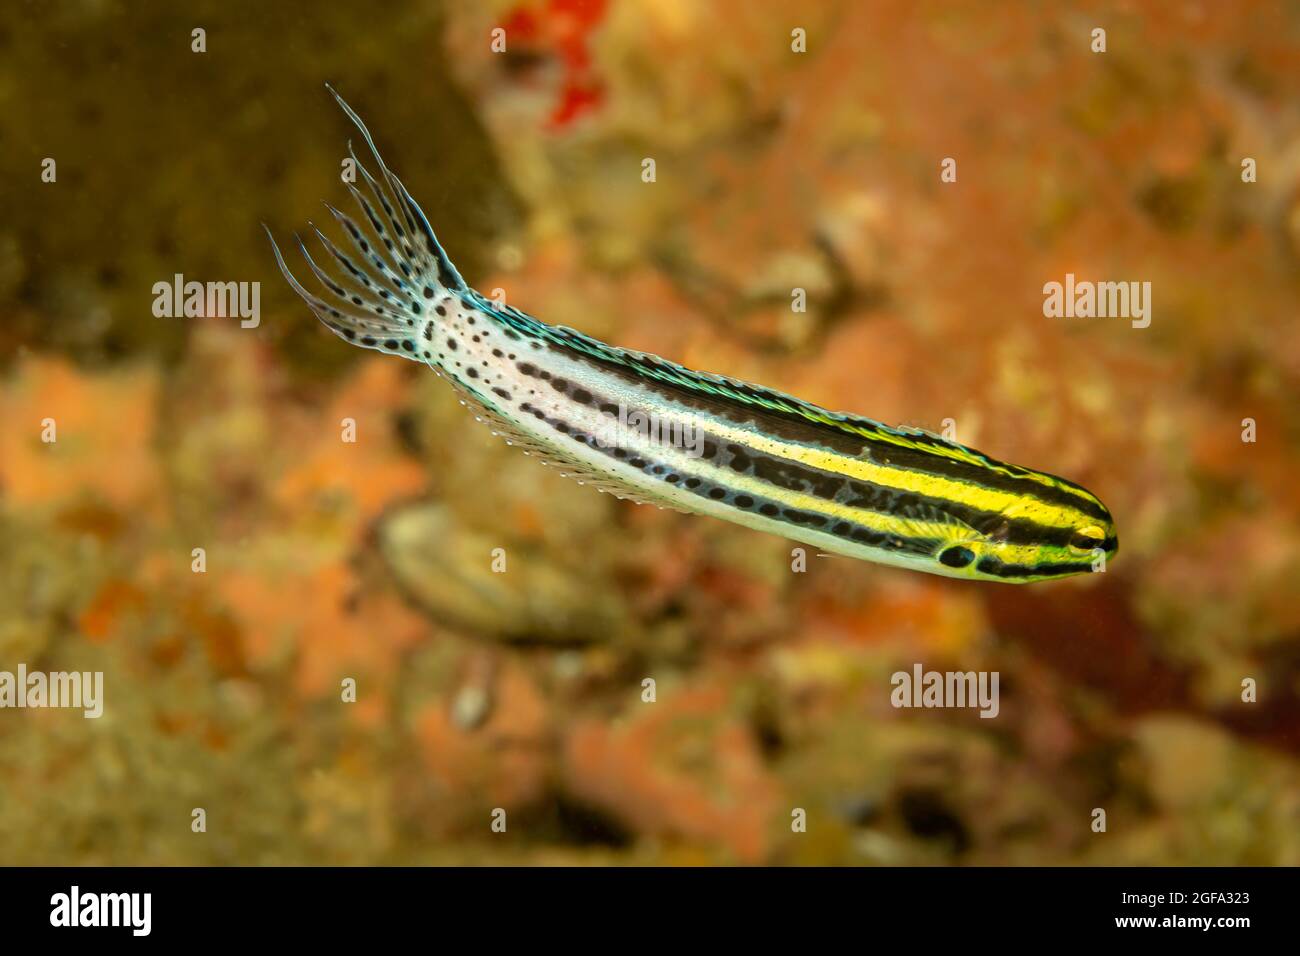 The striped poison-fang blenny, Meiacanthus grammistes, have large canines associated with venom glands that serve as defense weapons. Unlike most ven Stock Photo